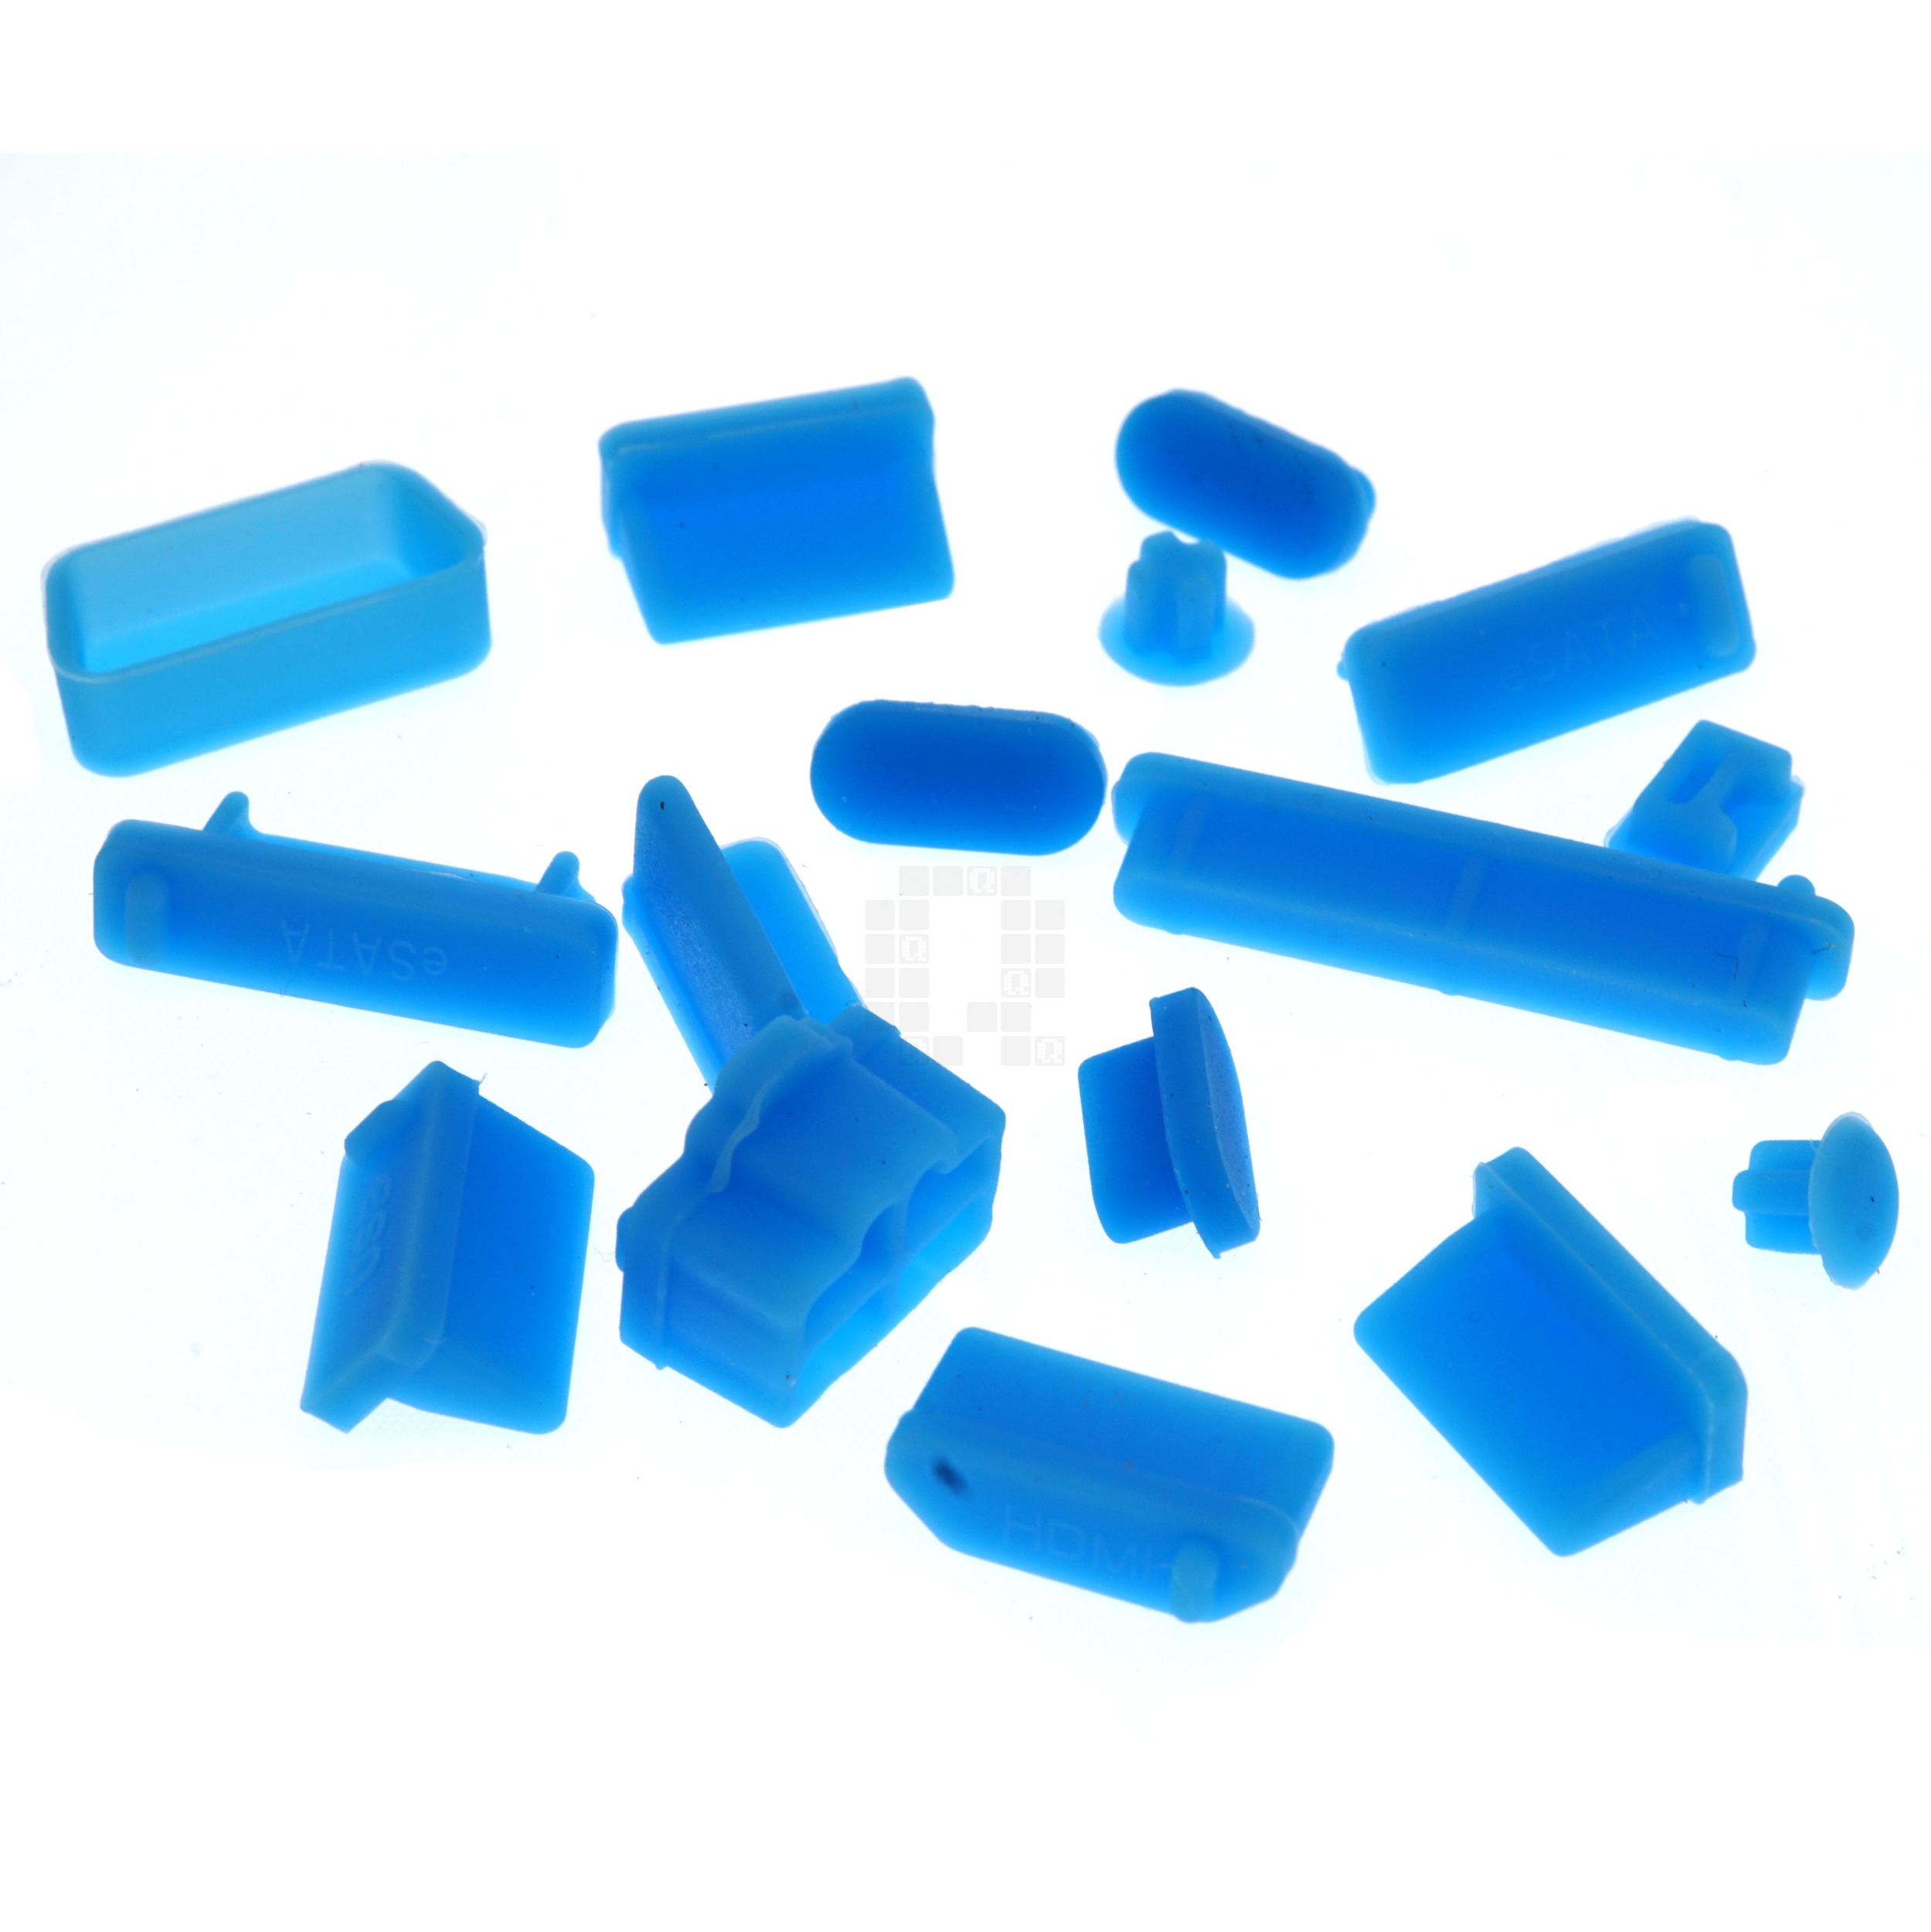 16-Piece Silicone Anti Dust Plug Covers for Laptop and Mobile Devices, Blue, USB